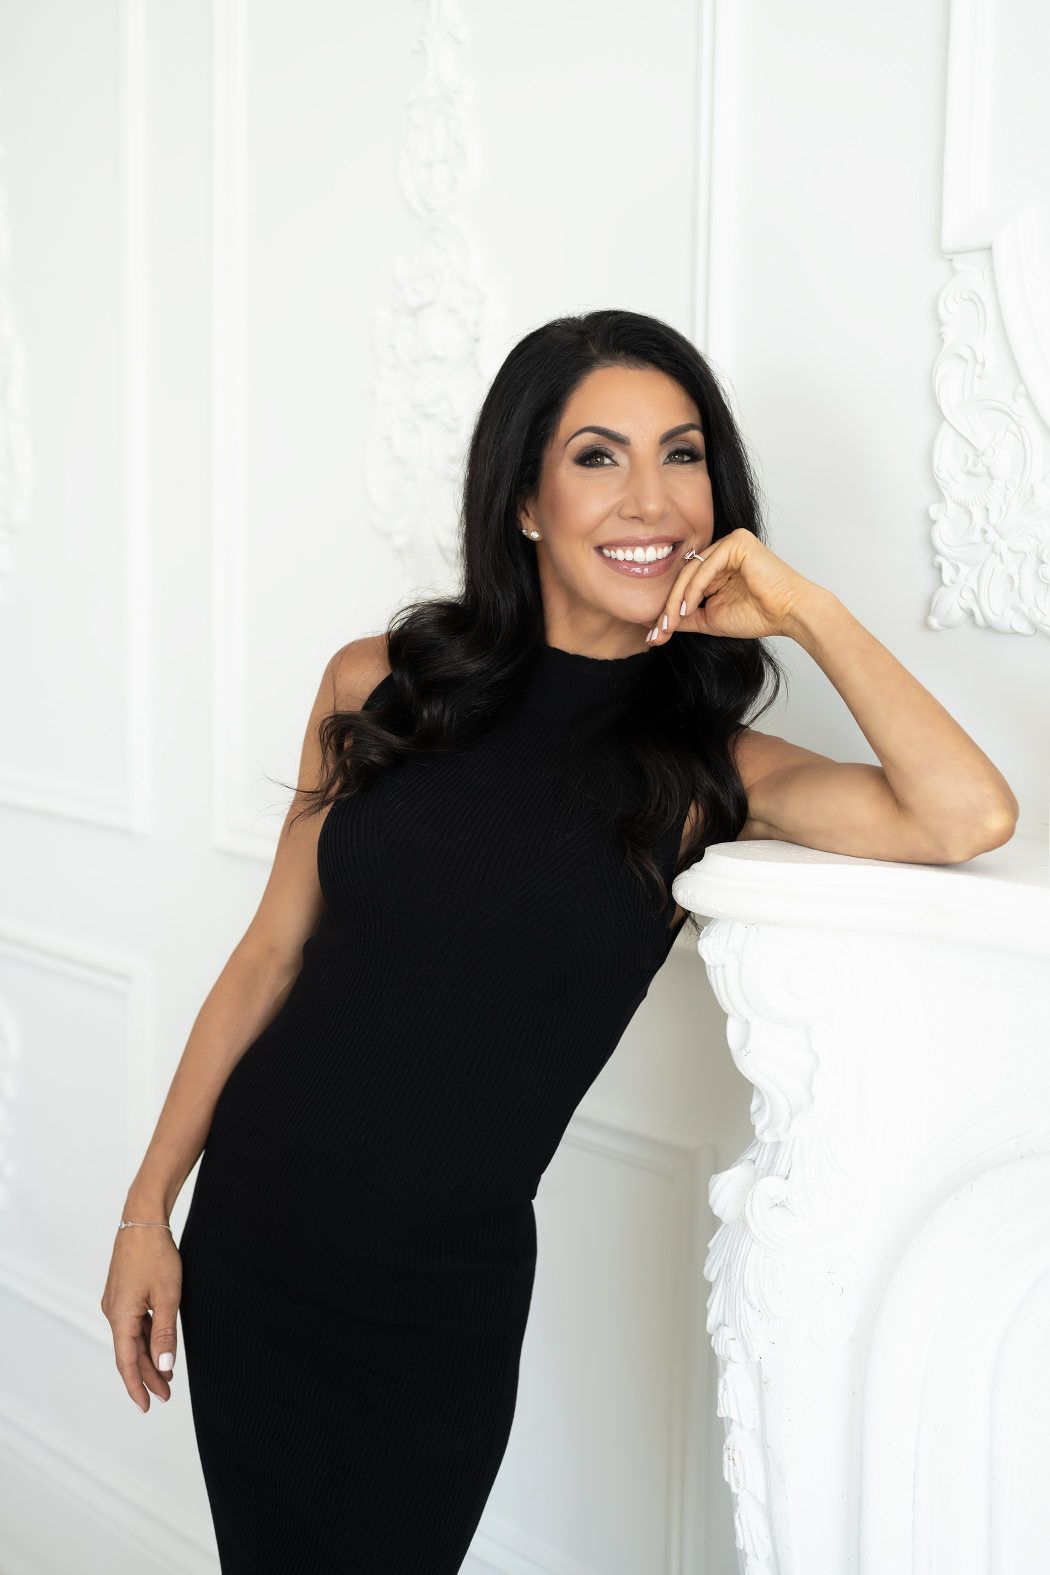 Woman in a contrasting black sleeveless dress, smiling engagingly while resting her elbow on an all-white fireplace mantle, creating a captivating personal branding photography scene.